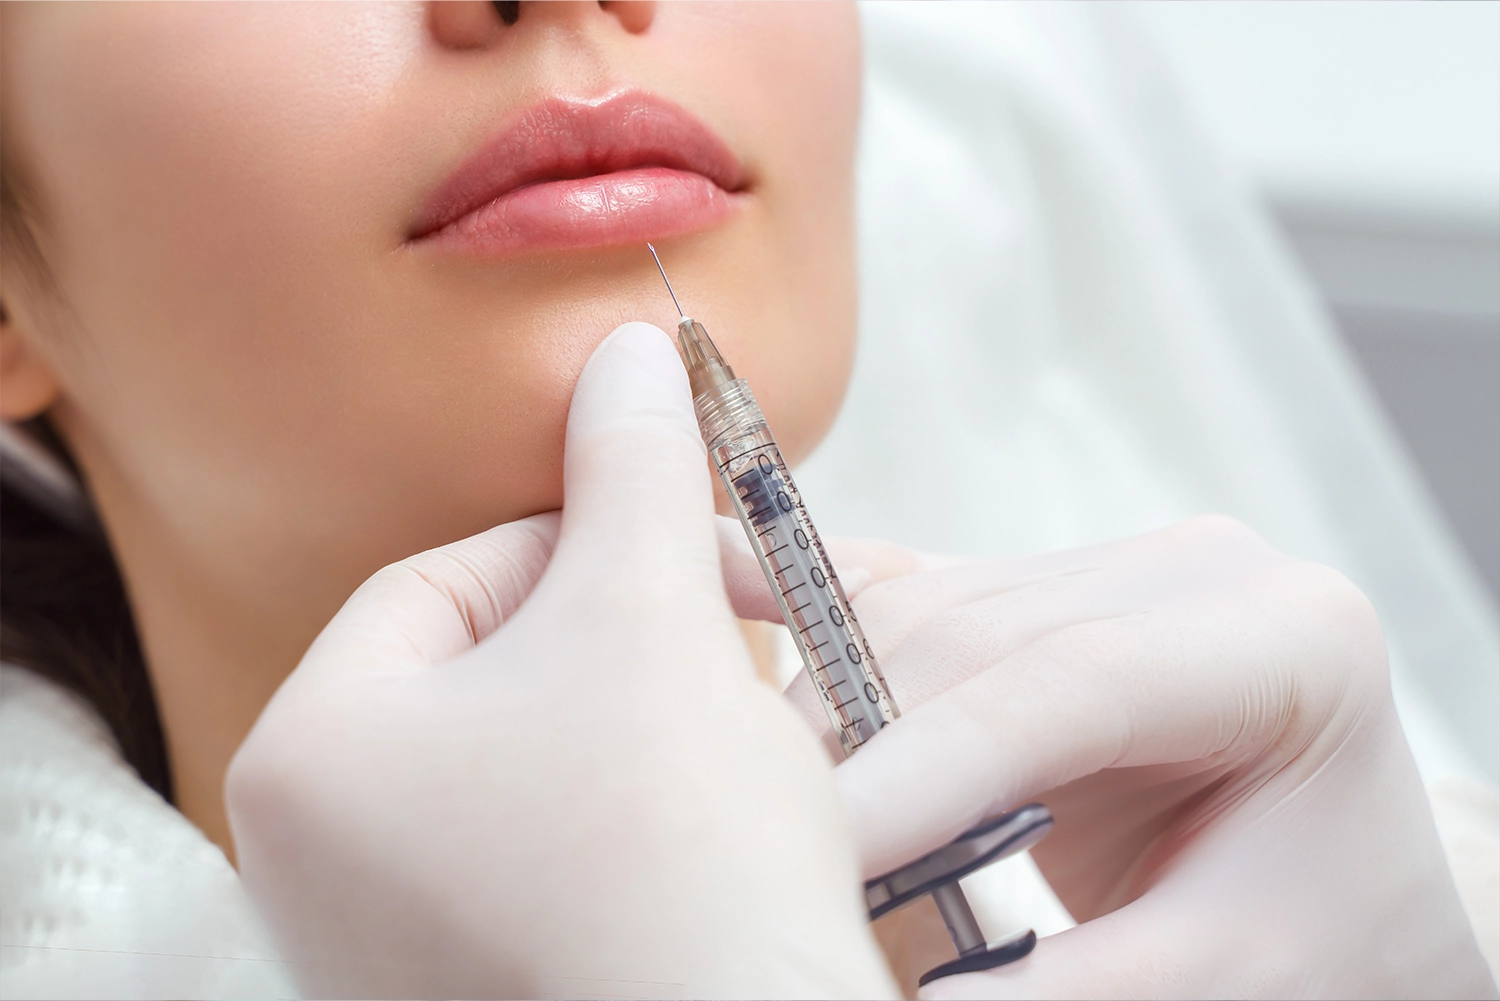 Why Dermal Filler Dissolving and Correction?